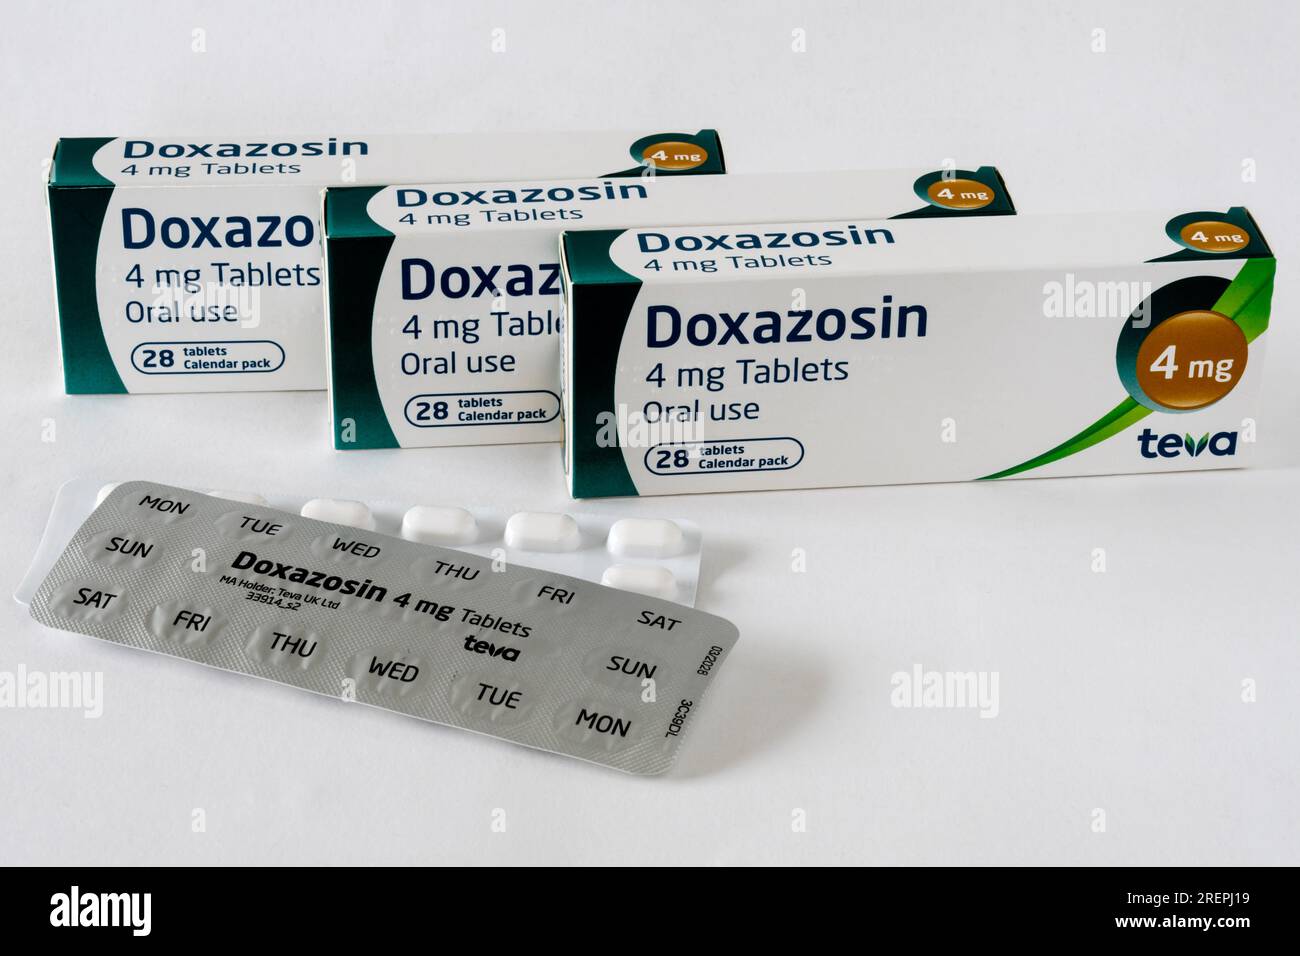 Stock image of packets of Doxazosin pills used in the treatment of high blood pressure. Stock Photo